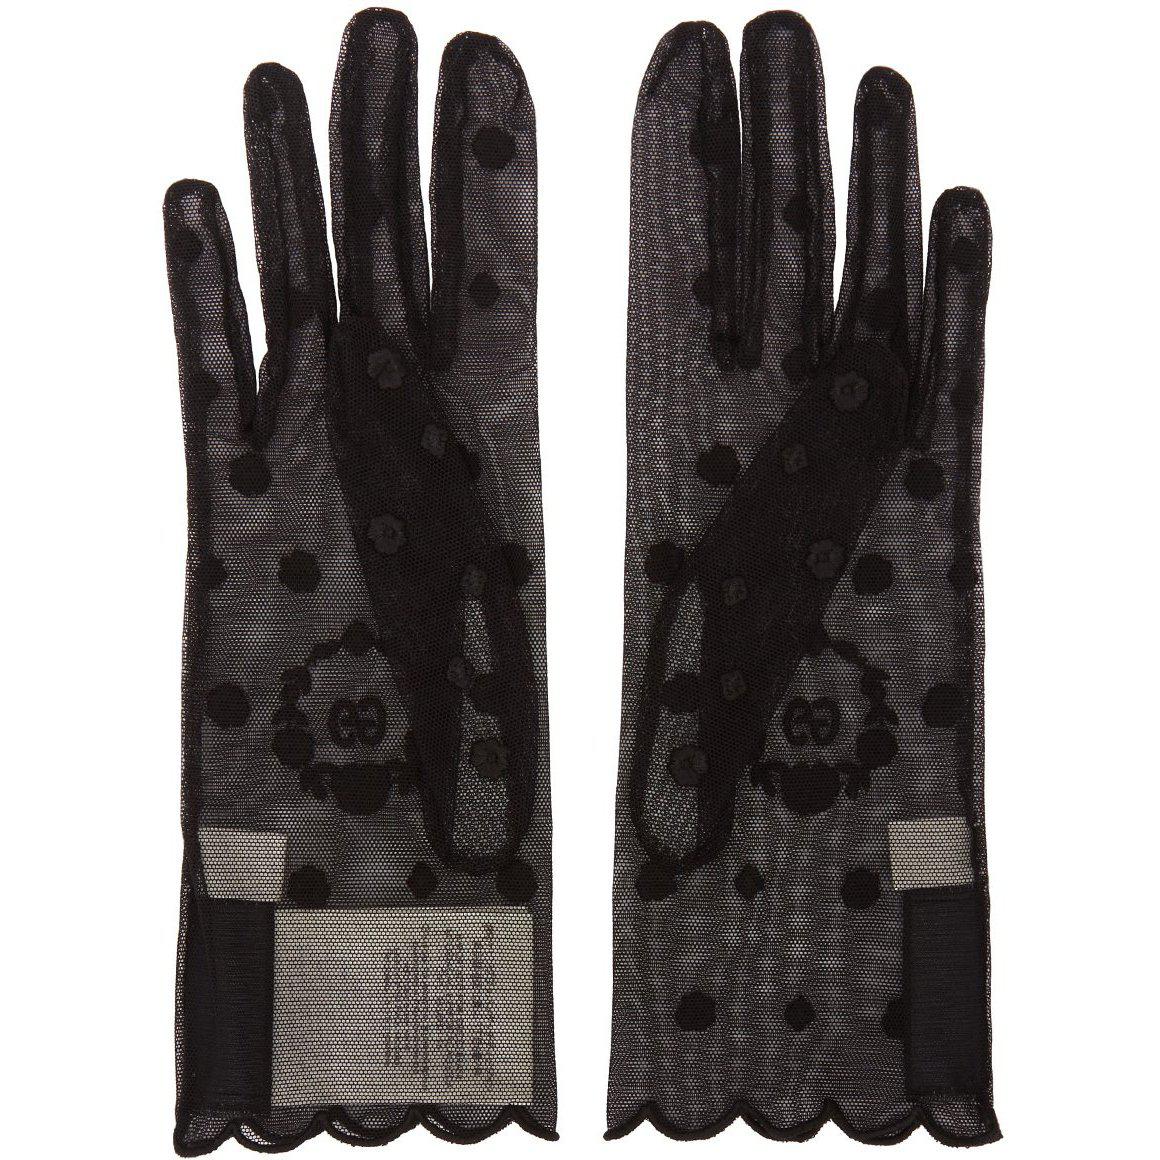 GG Embroidered Tulle Gloves in Black - Gucci